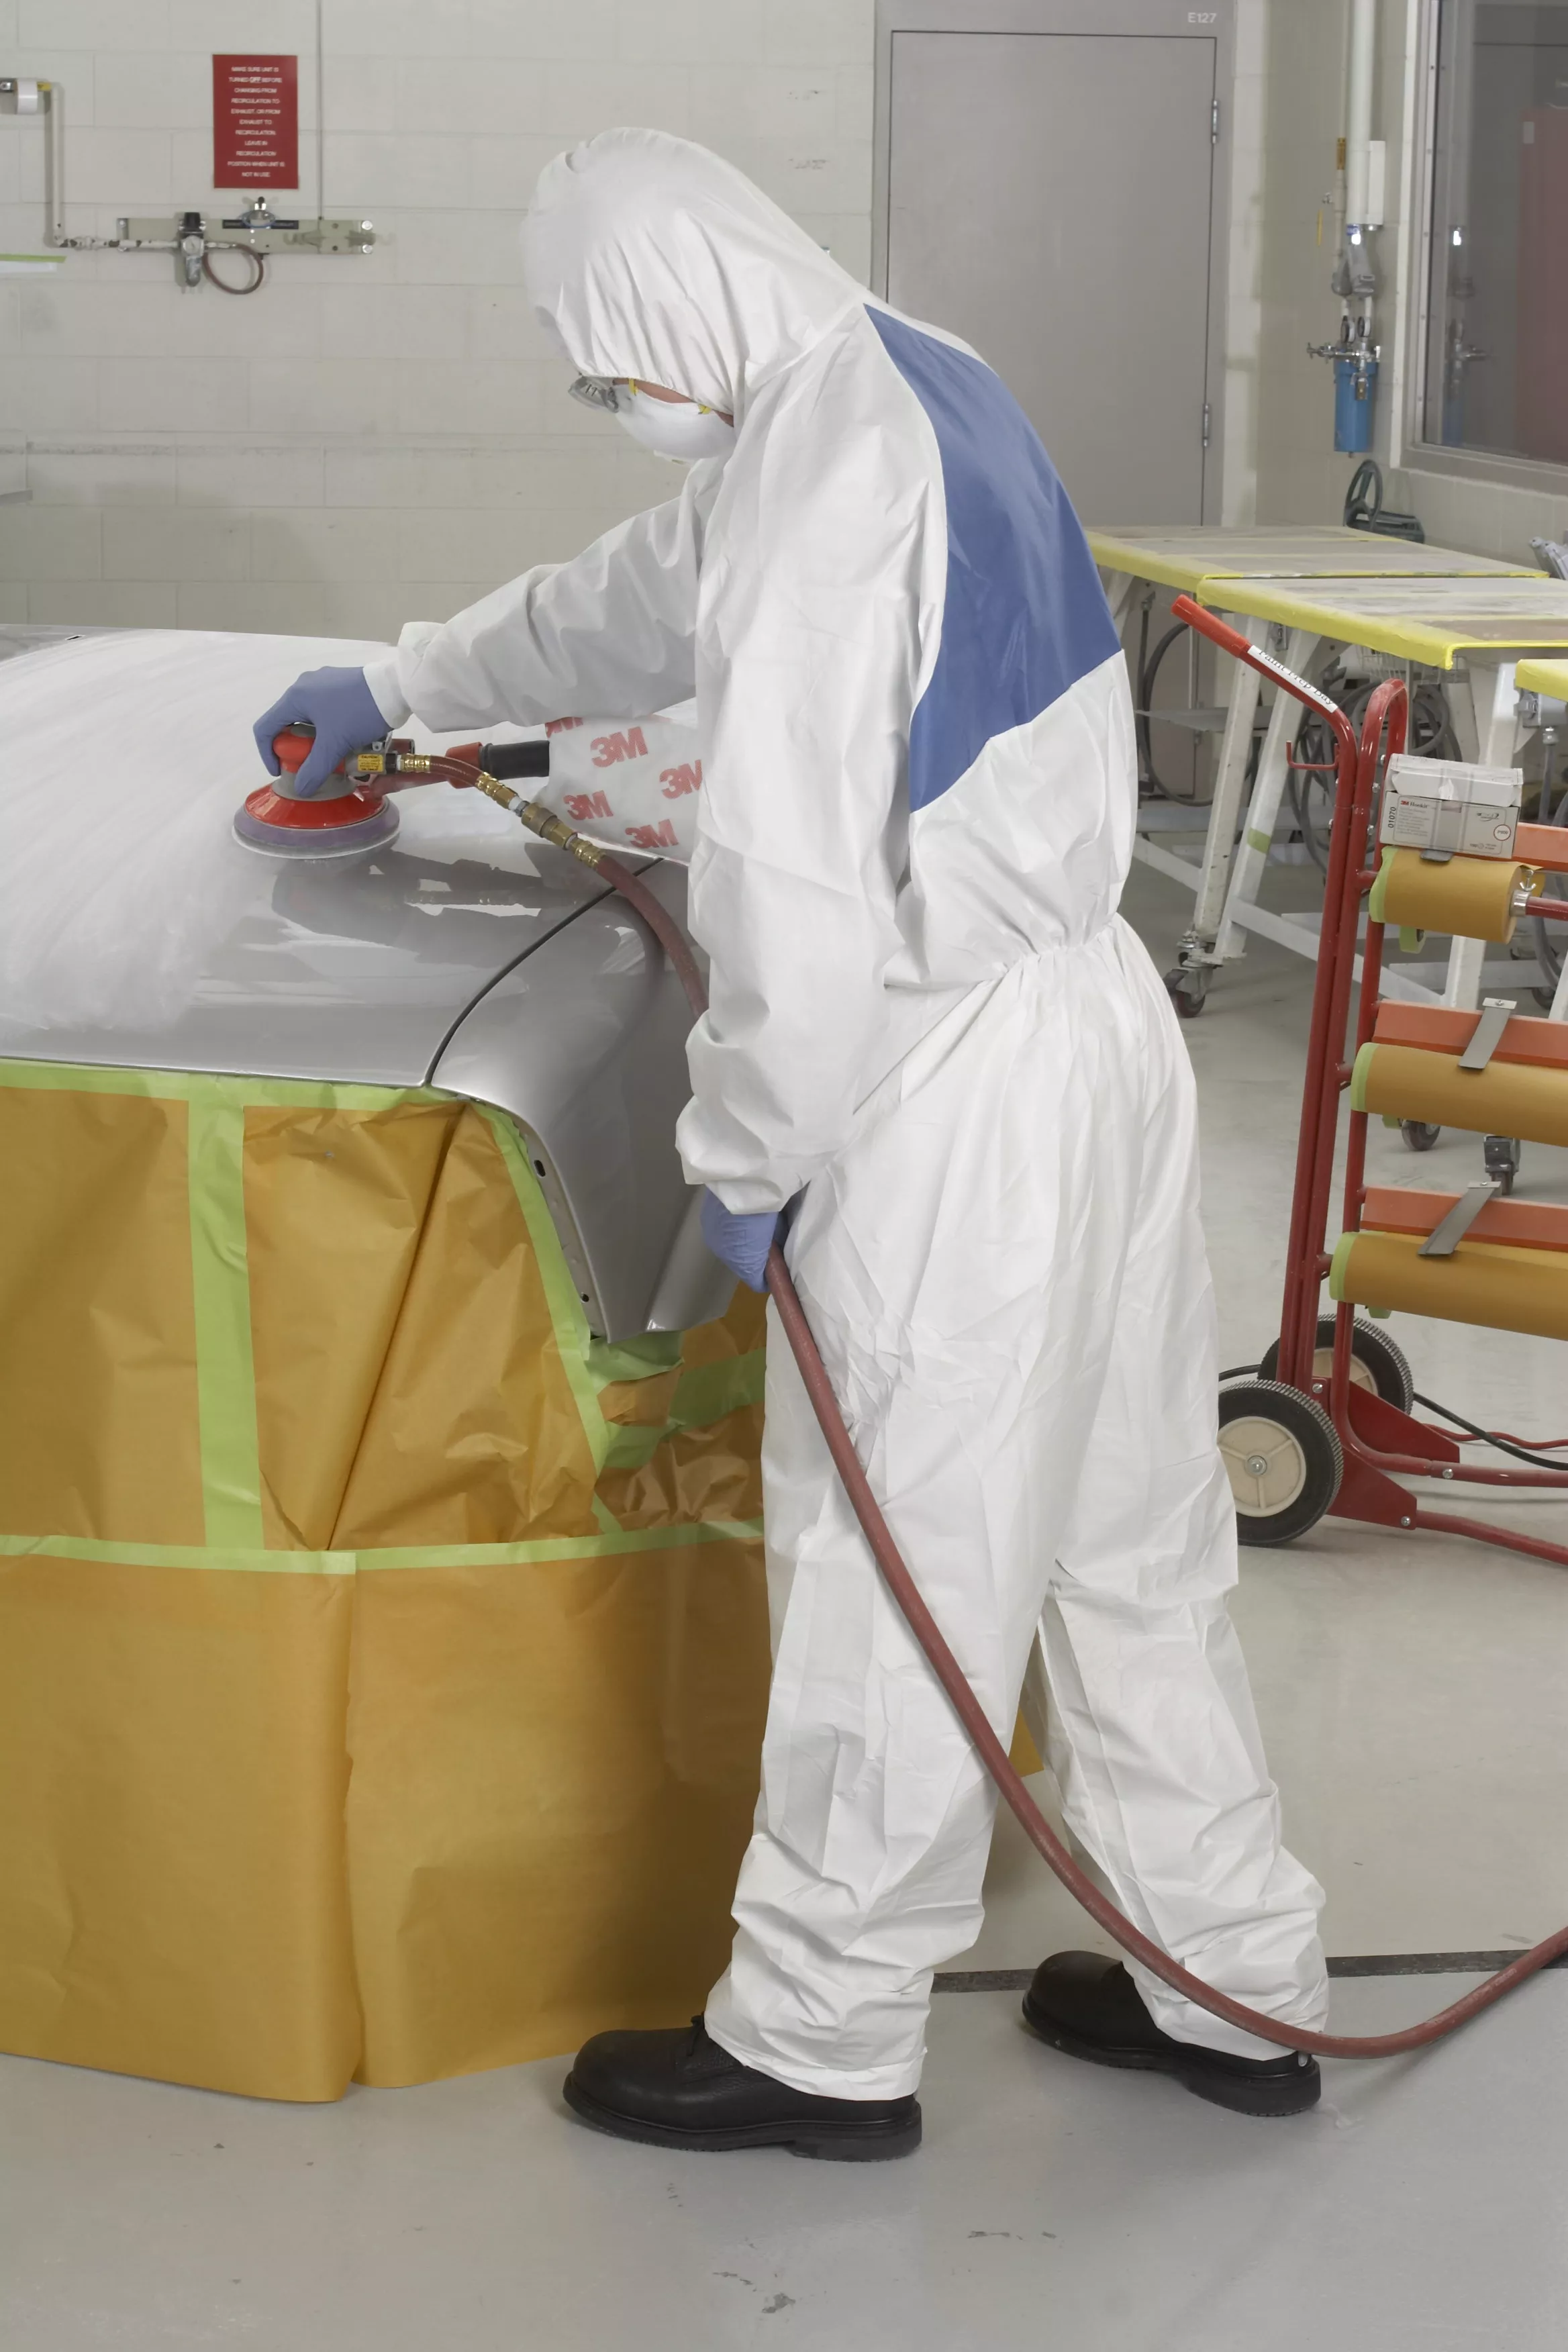 SKU 7100036529 | 3M™ Disposable Protective Coverall 4540+-XXL White/Blue MIV Type 5/6